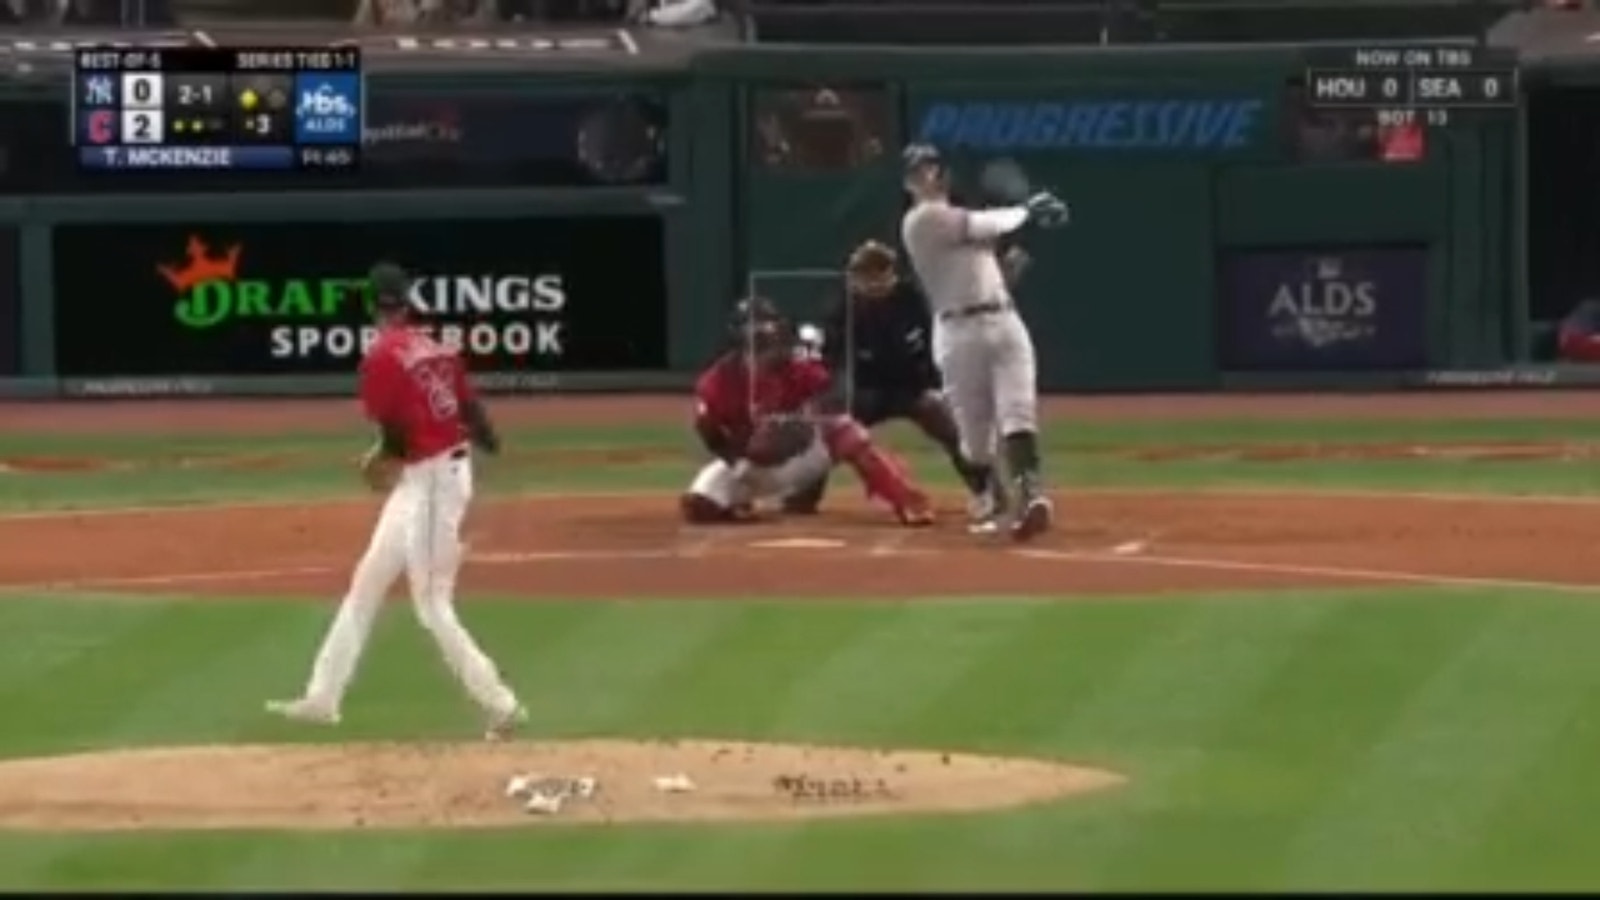 Aaron Judge hits a two-run home run to tie the game